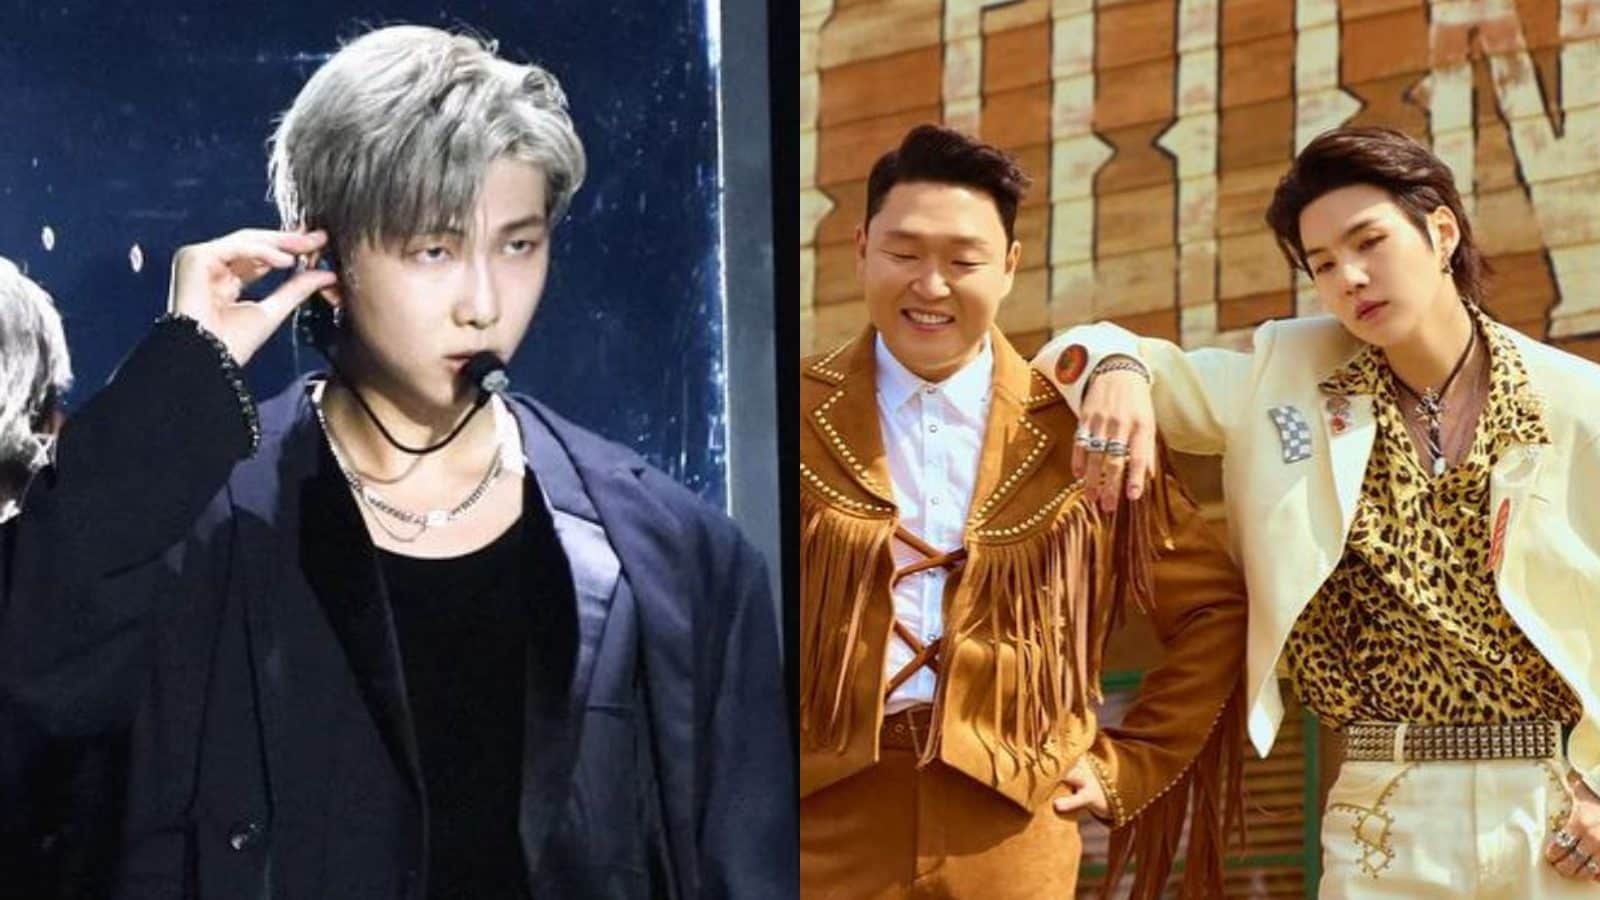 BTS Member Suga Wore RM's Cardigan From “Run” on His  Broadcast